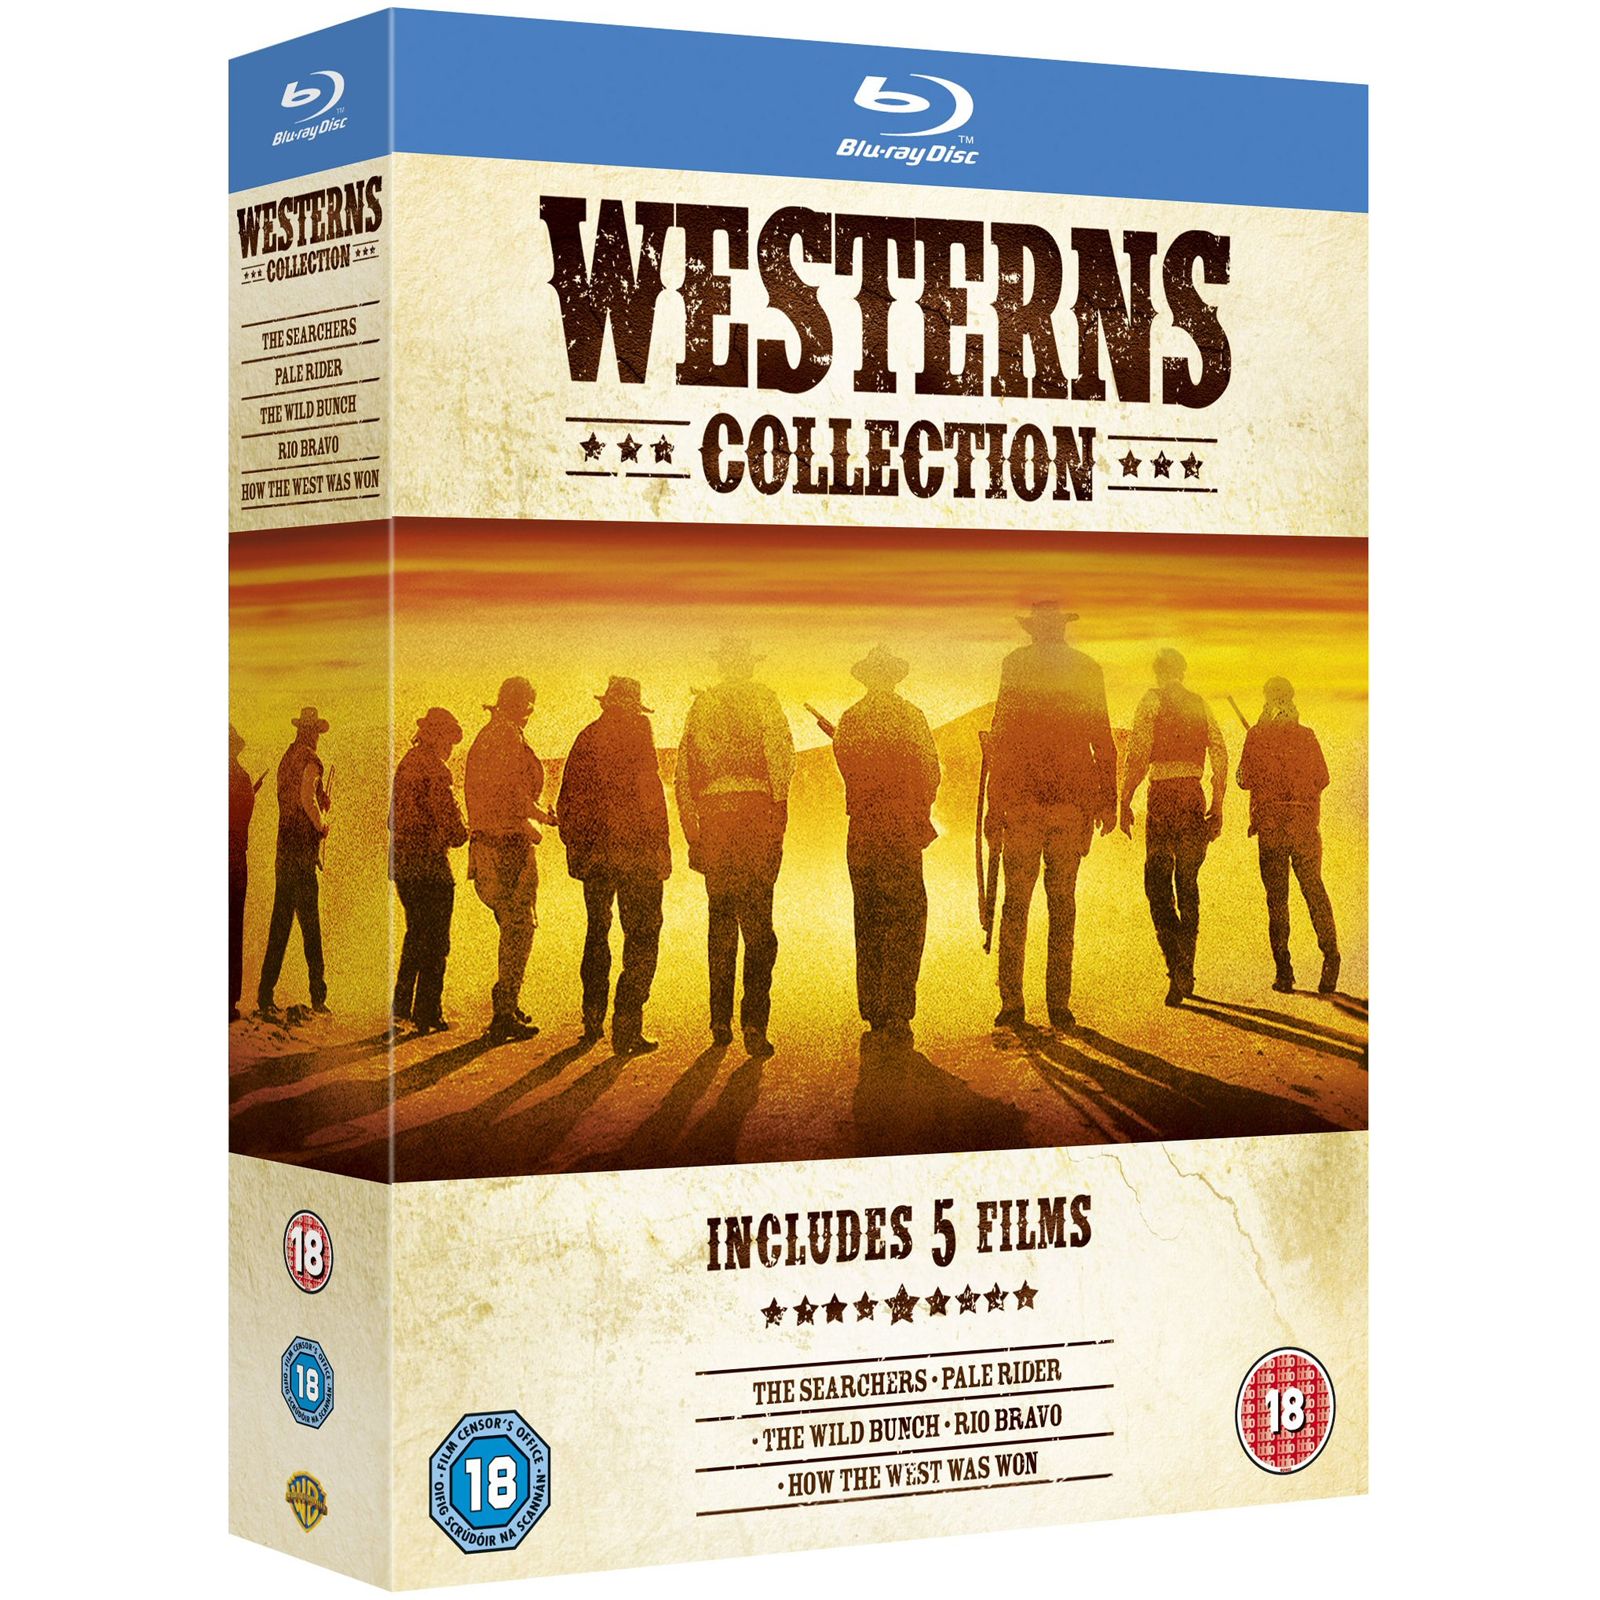 Clint Eastwood Western Collection Dvd